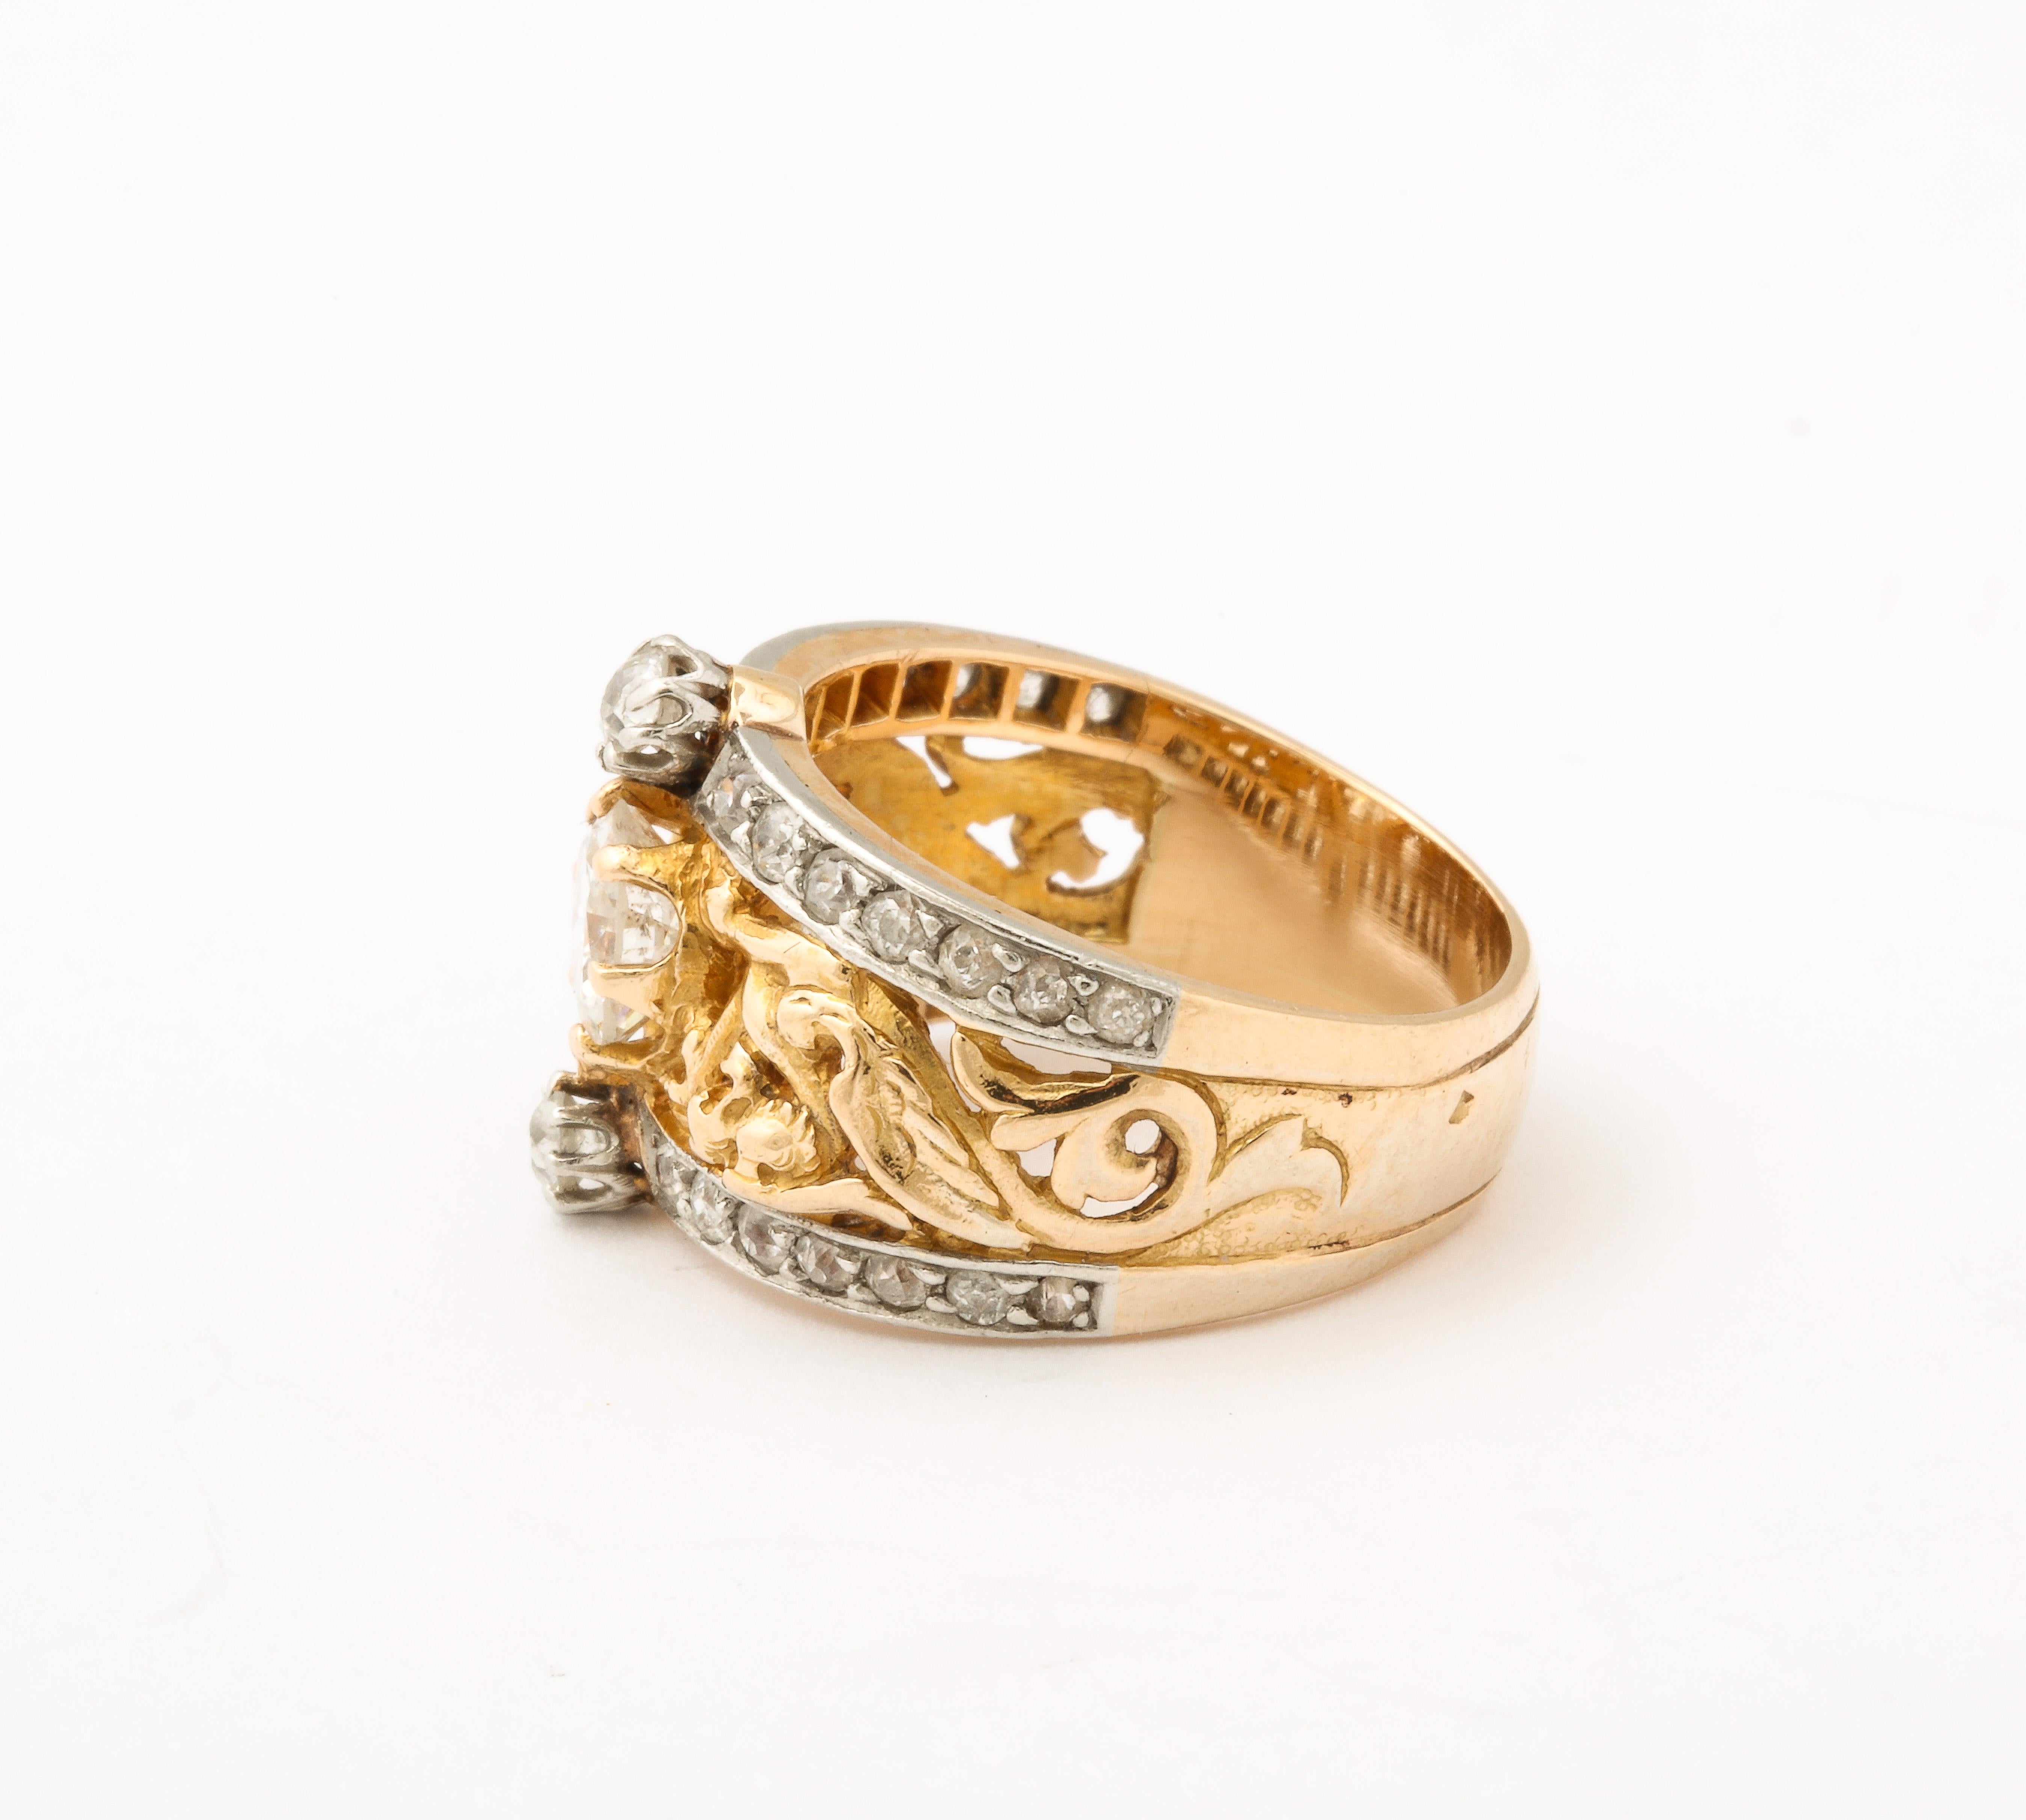 Antique French Art Nouveau Diamond Ring  In Excellent Condition For Sale In Stamford, CT